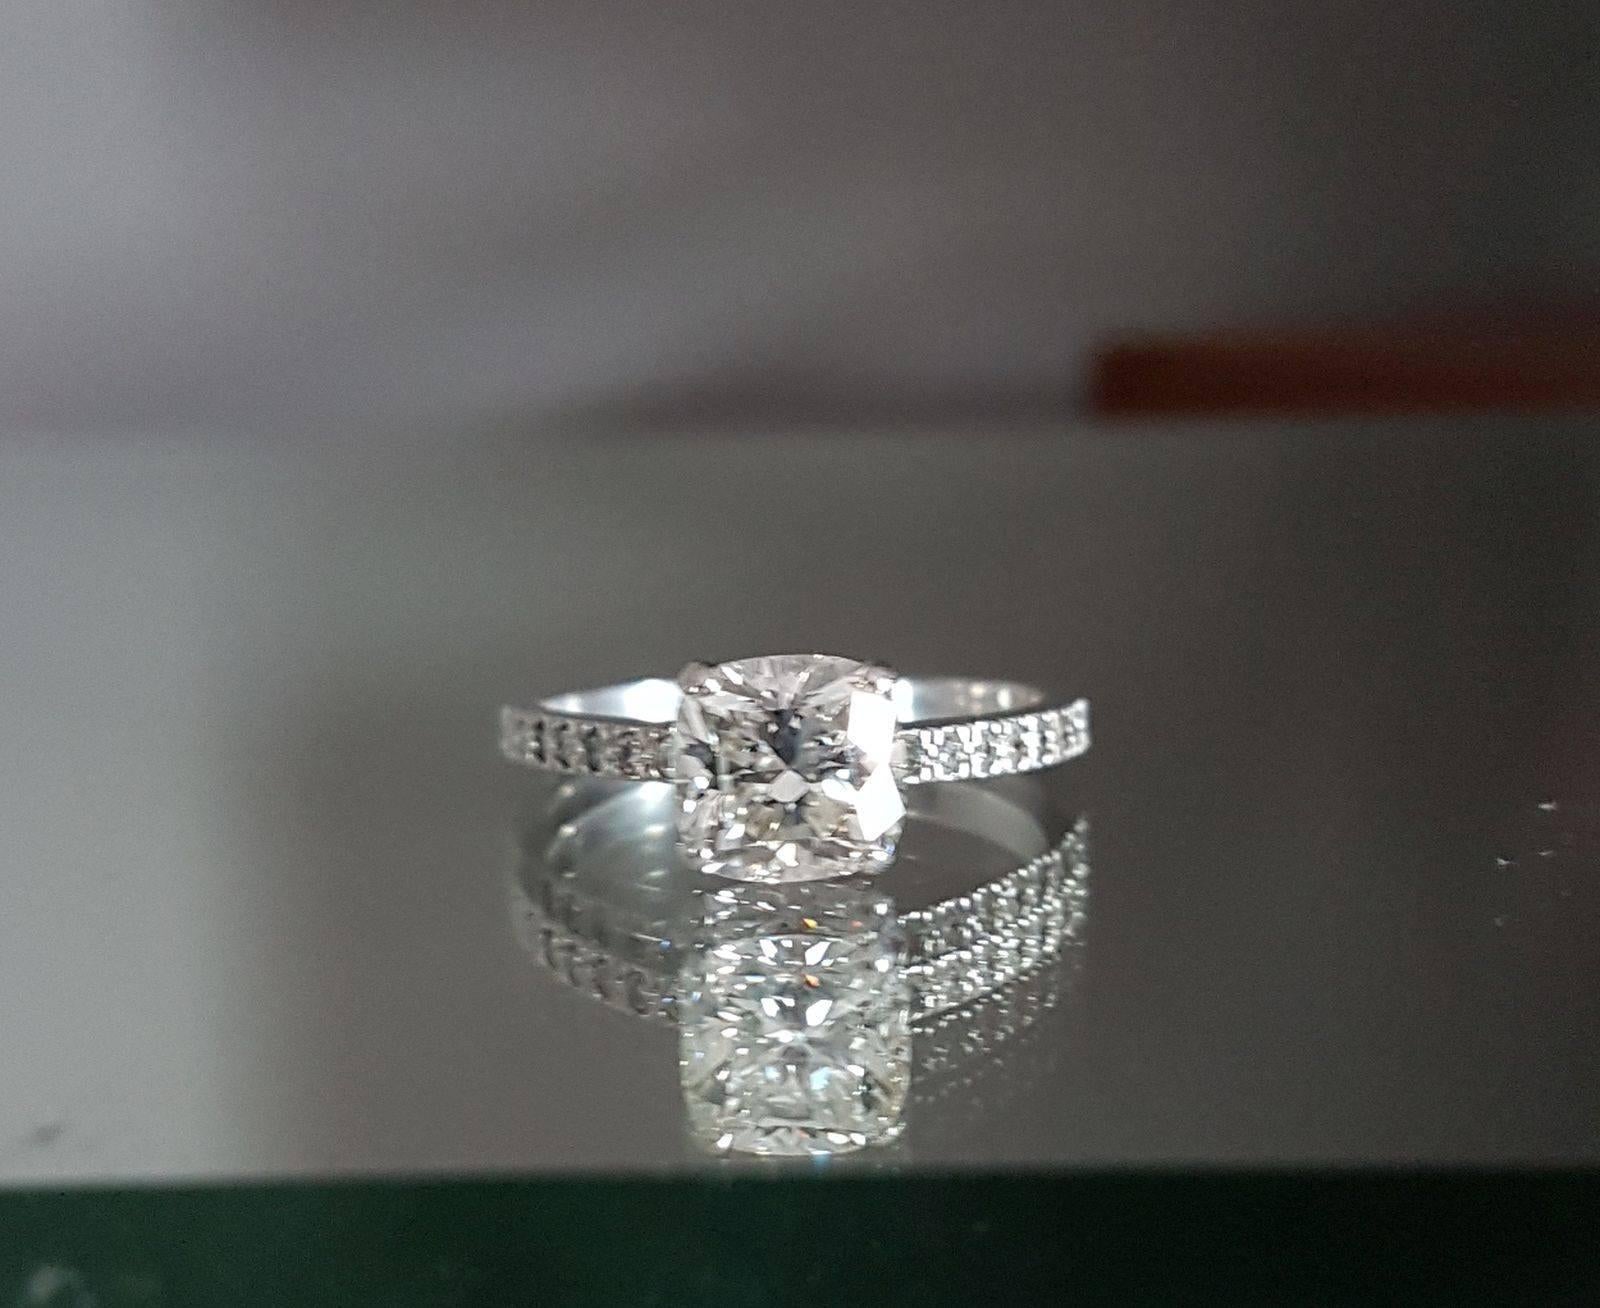 What a wonderful Christmas gift this would make!  Stunning Tiffany Novo diamond ring.  The main diamond is 1.82 cts and is H colour VVS1 clarity.  The side diamonds add another 0.16 cts and the ring is made of platinum.  It is a size 8 US which is a